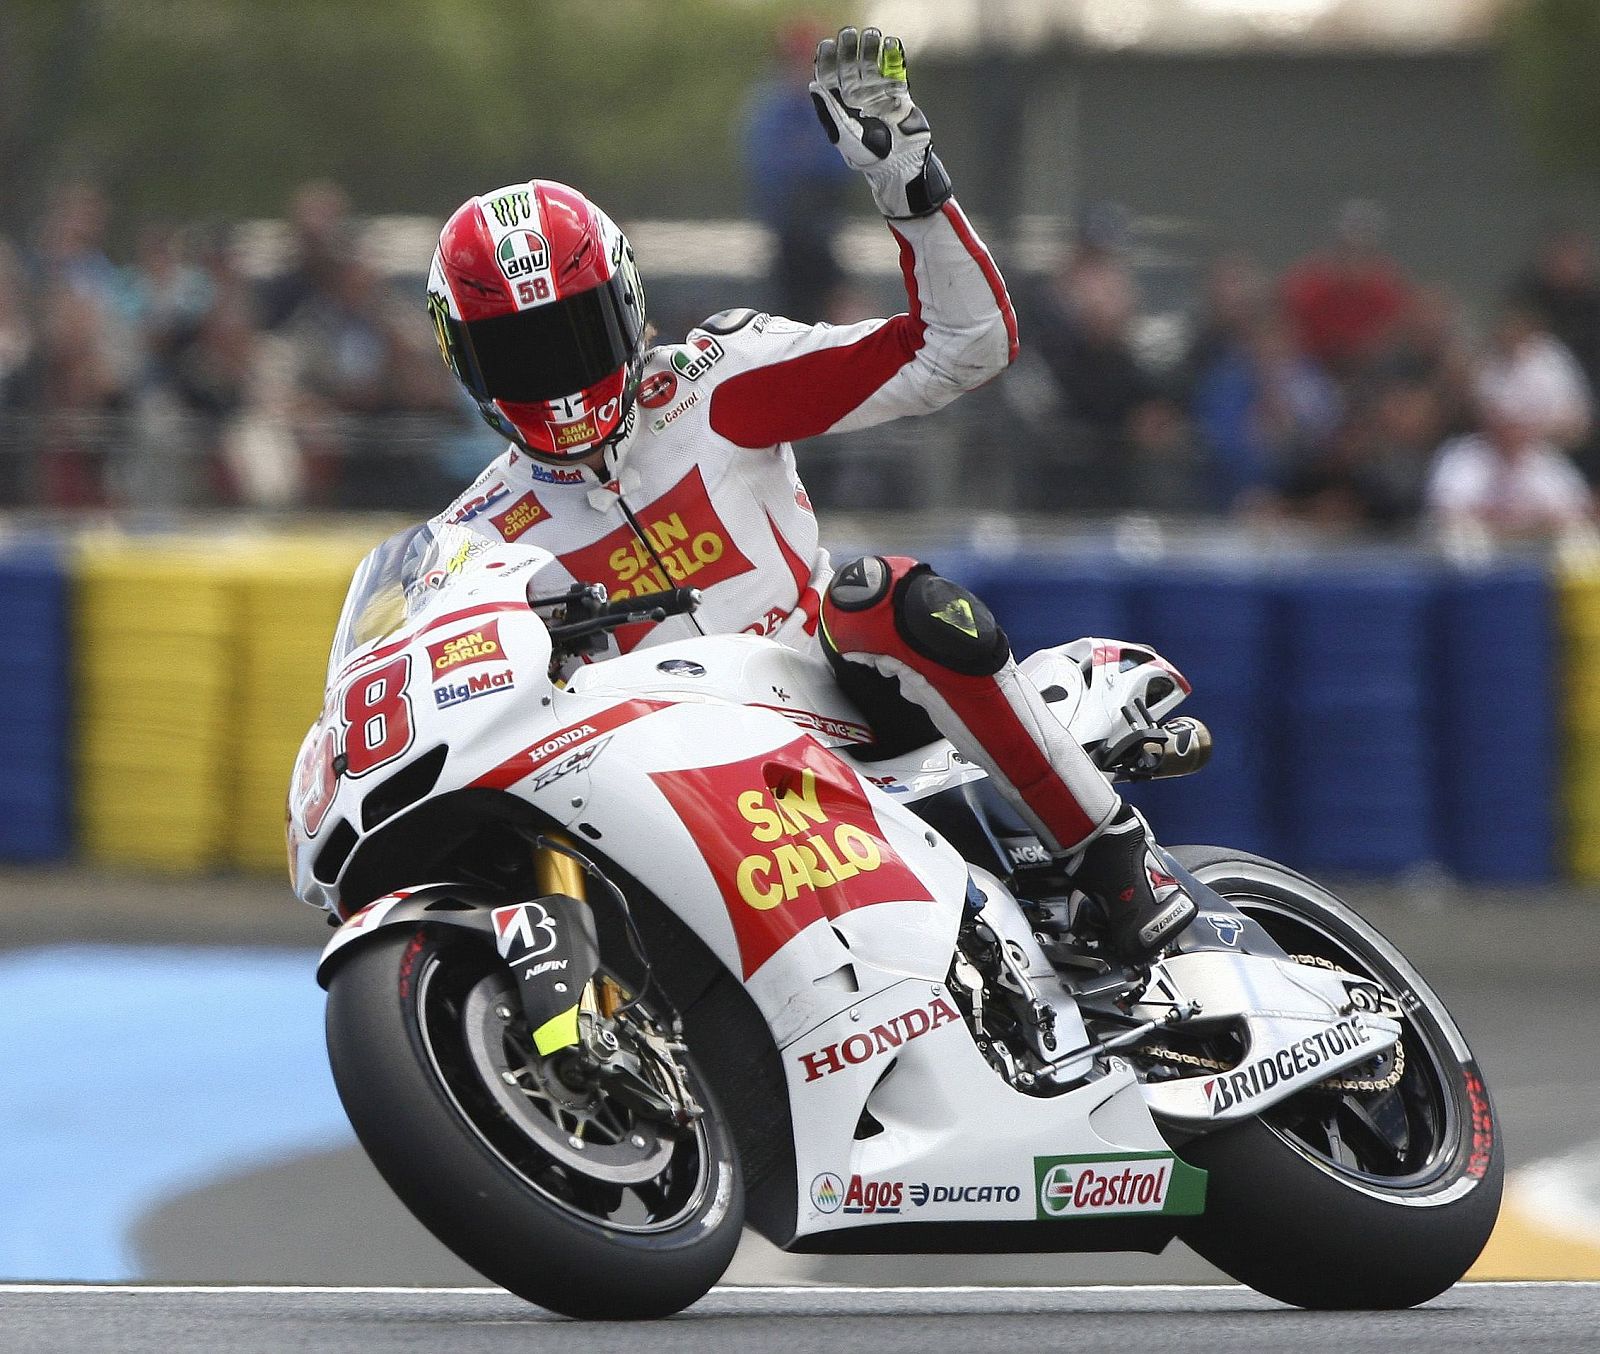 Honda MotoGP rider Marco Simoncelli of Italy celebrates after qualifying practice at the French Grand Prix at the Le Mans circuit in central France